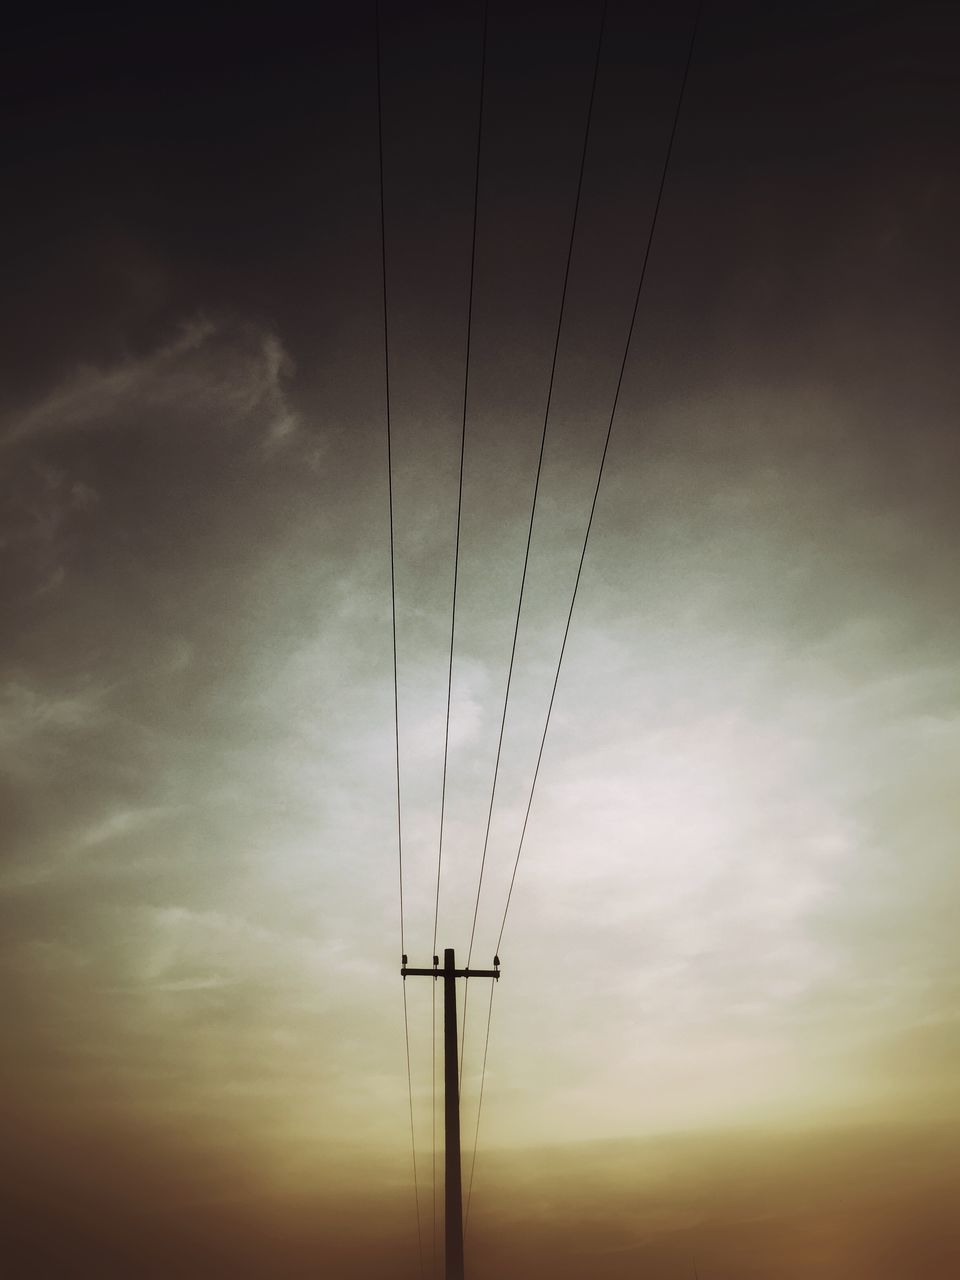 low angle view, sky, silhouette, sunset, power line, fuel and power generation, connection, electricity pylon, electricity, technology, power supply, cloud - sky, cable, dusk, tranquility, nature, cloudy, cloud, scenics, outdoors